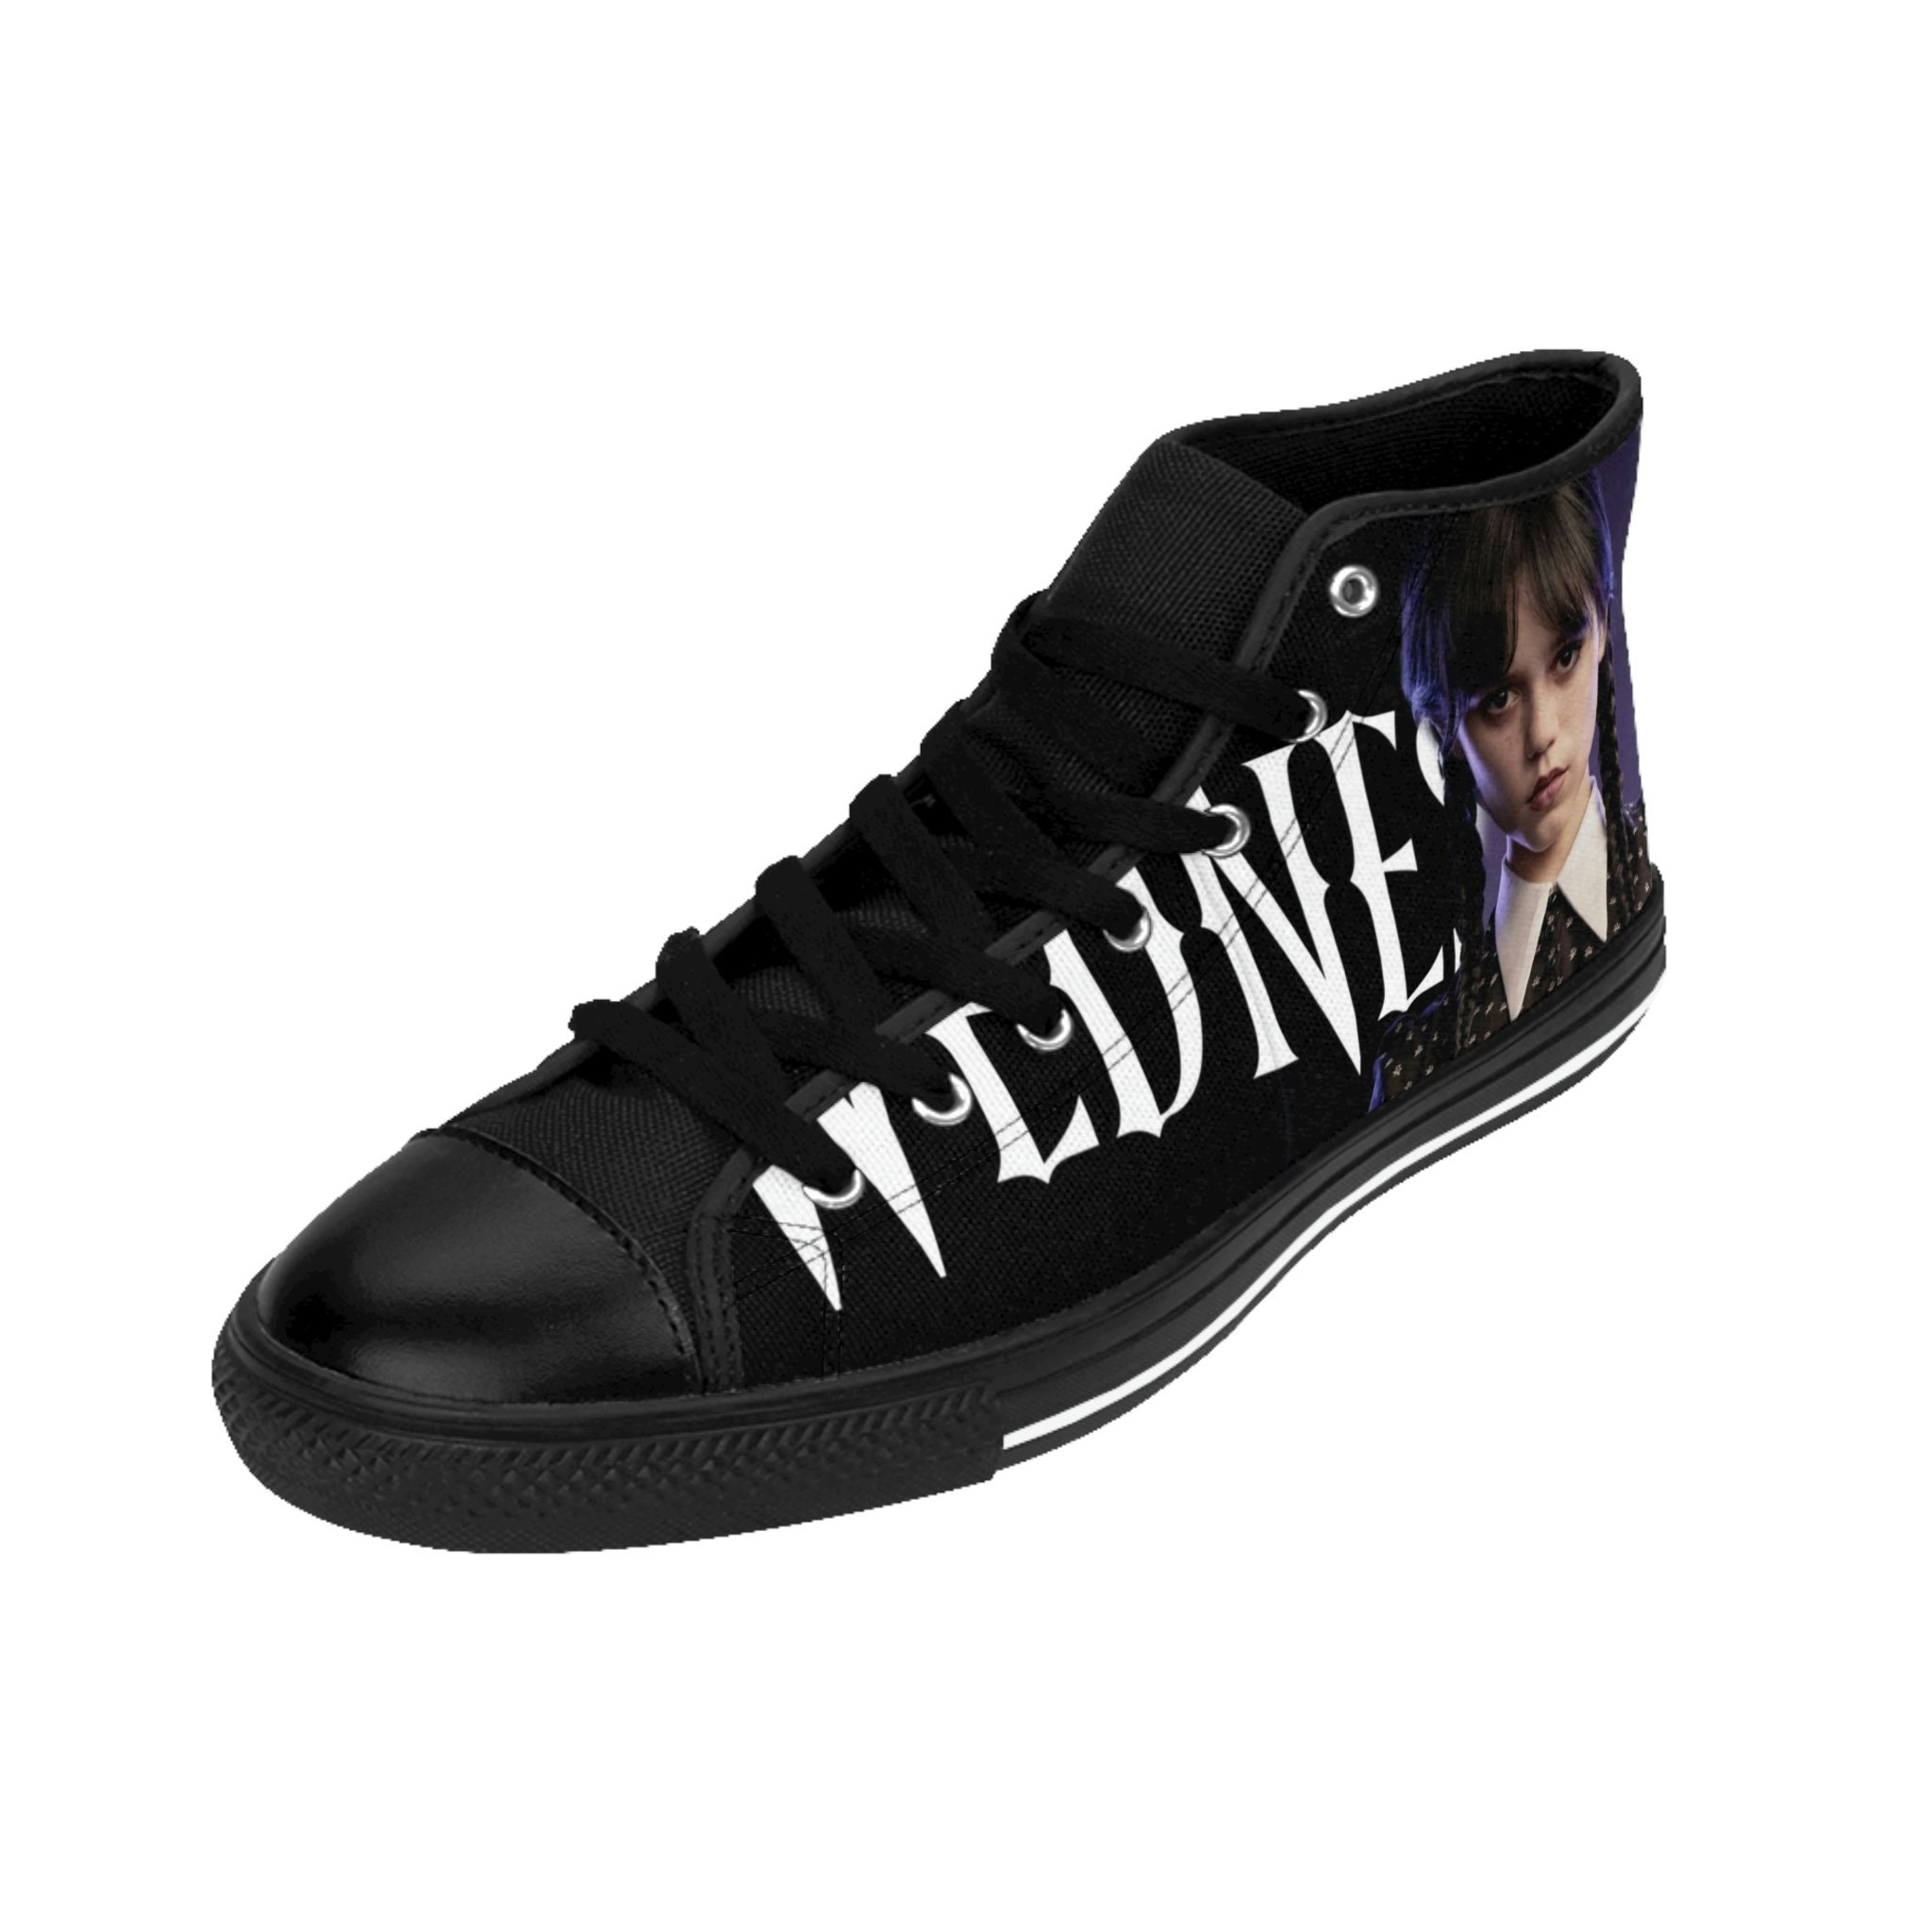 Wednesday addams Shoes, Wednesday addams High Top Sneakers